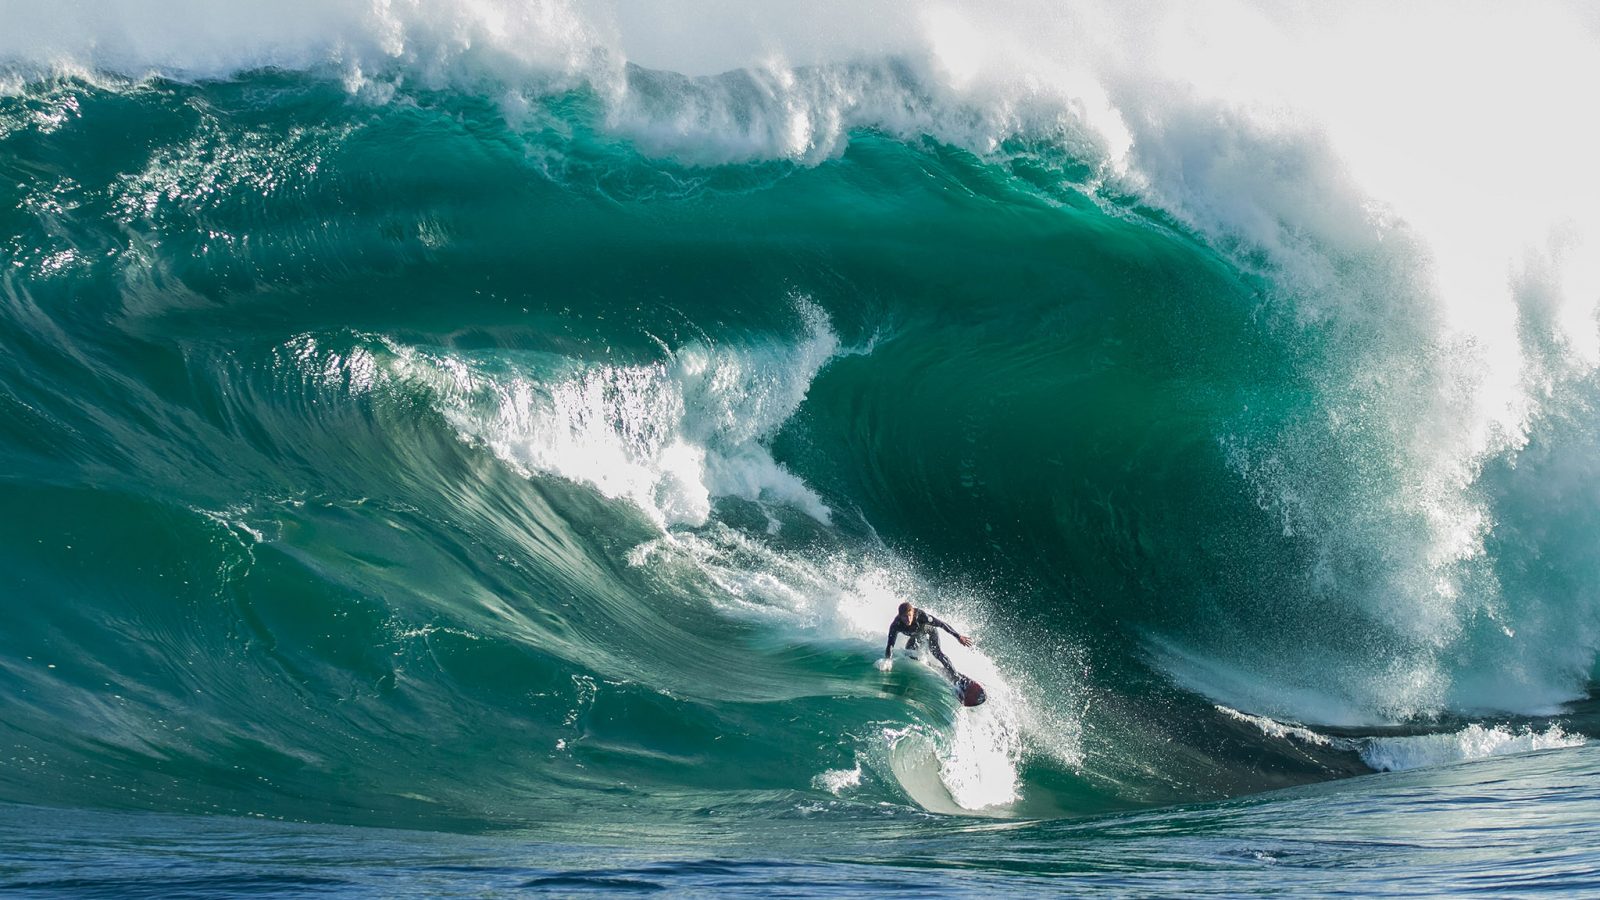 Shipstern Bluff. The World’s Scariest, Biggest Waves And Surf Spots